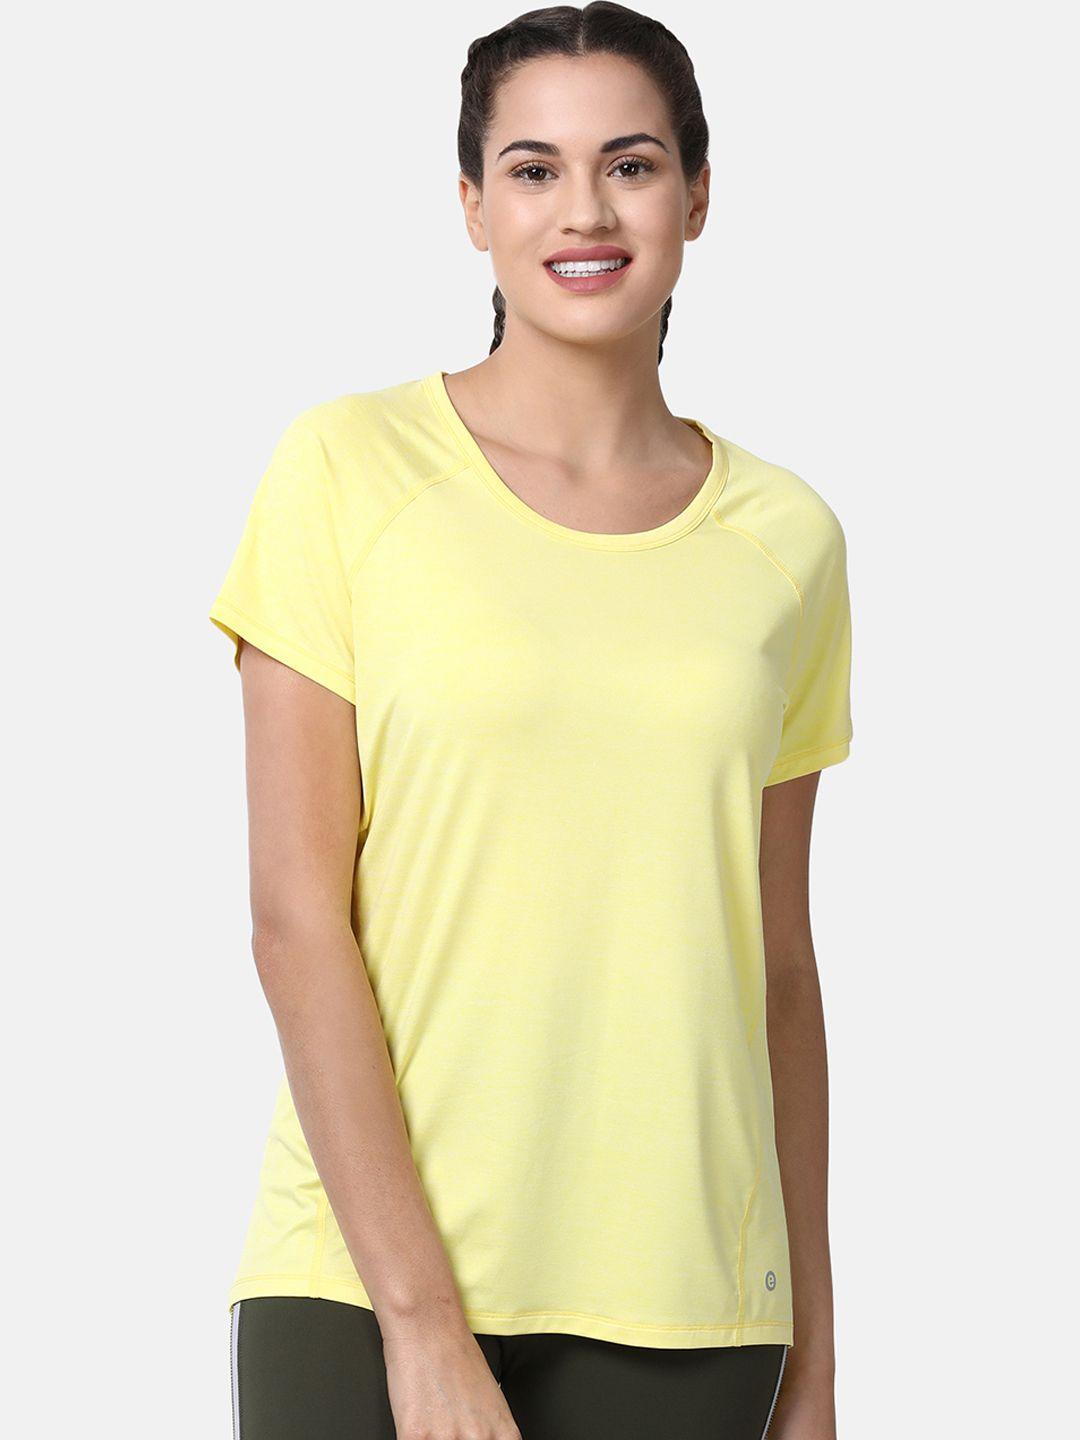 enamor-women-yellow-solid-relaxed-fit-athleisure-active-t-shirt